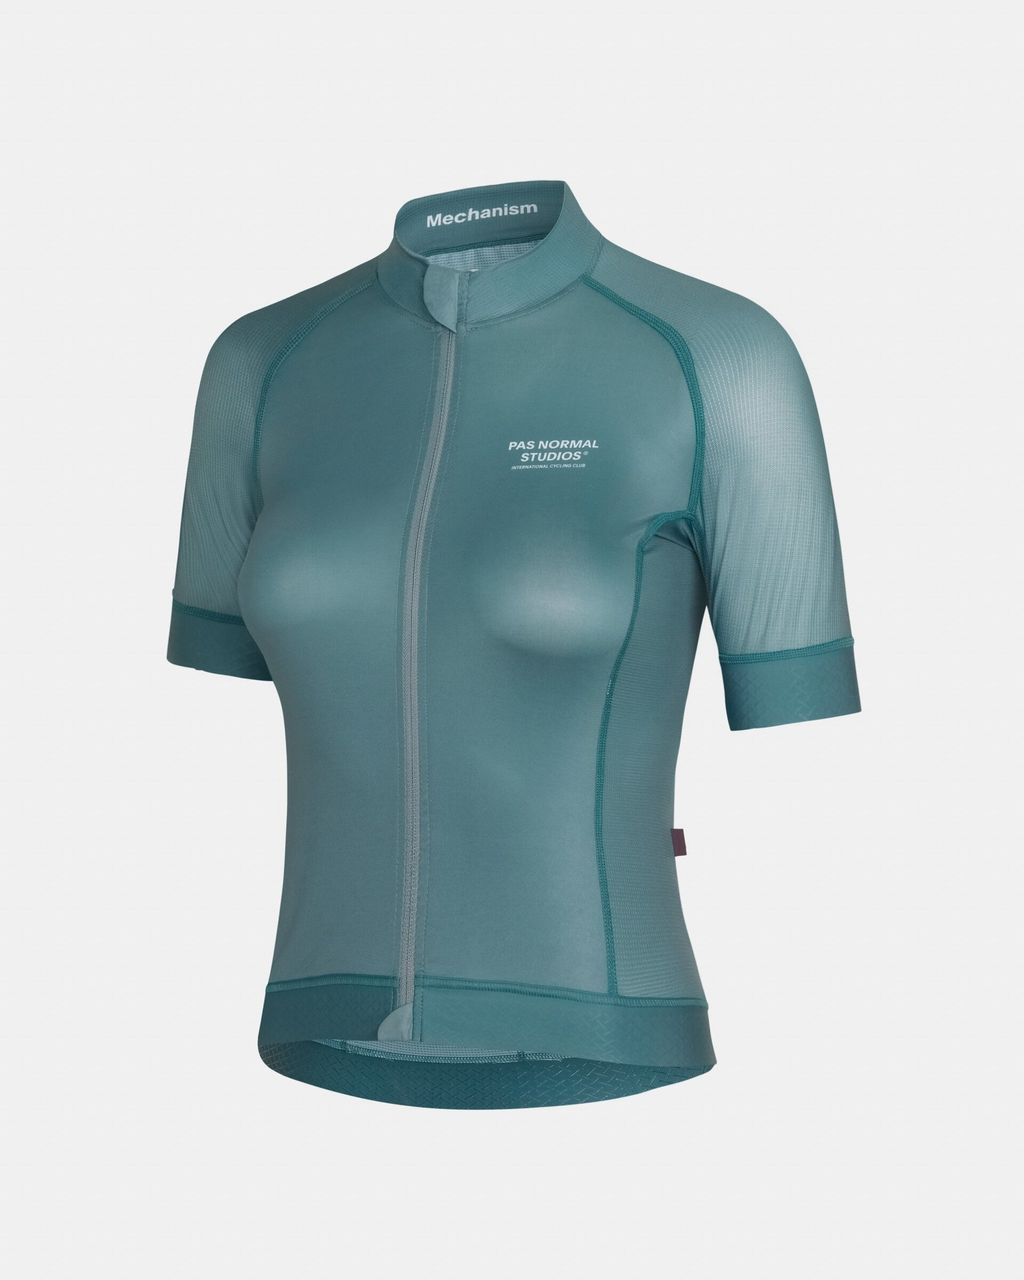 Womens-Mechanism-Jersey-Dusty-Teal-pdp-page